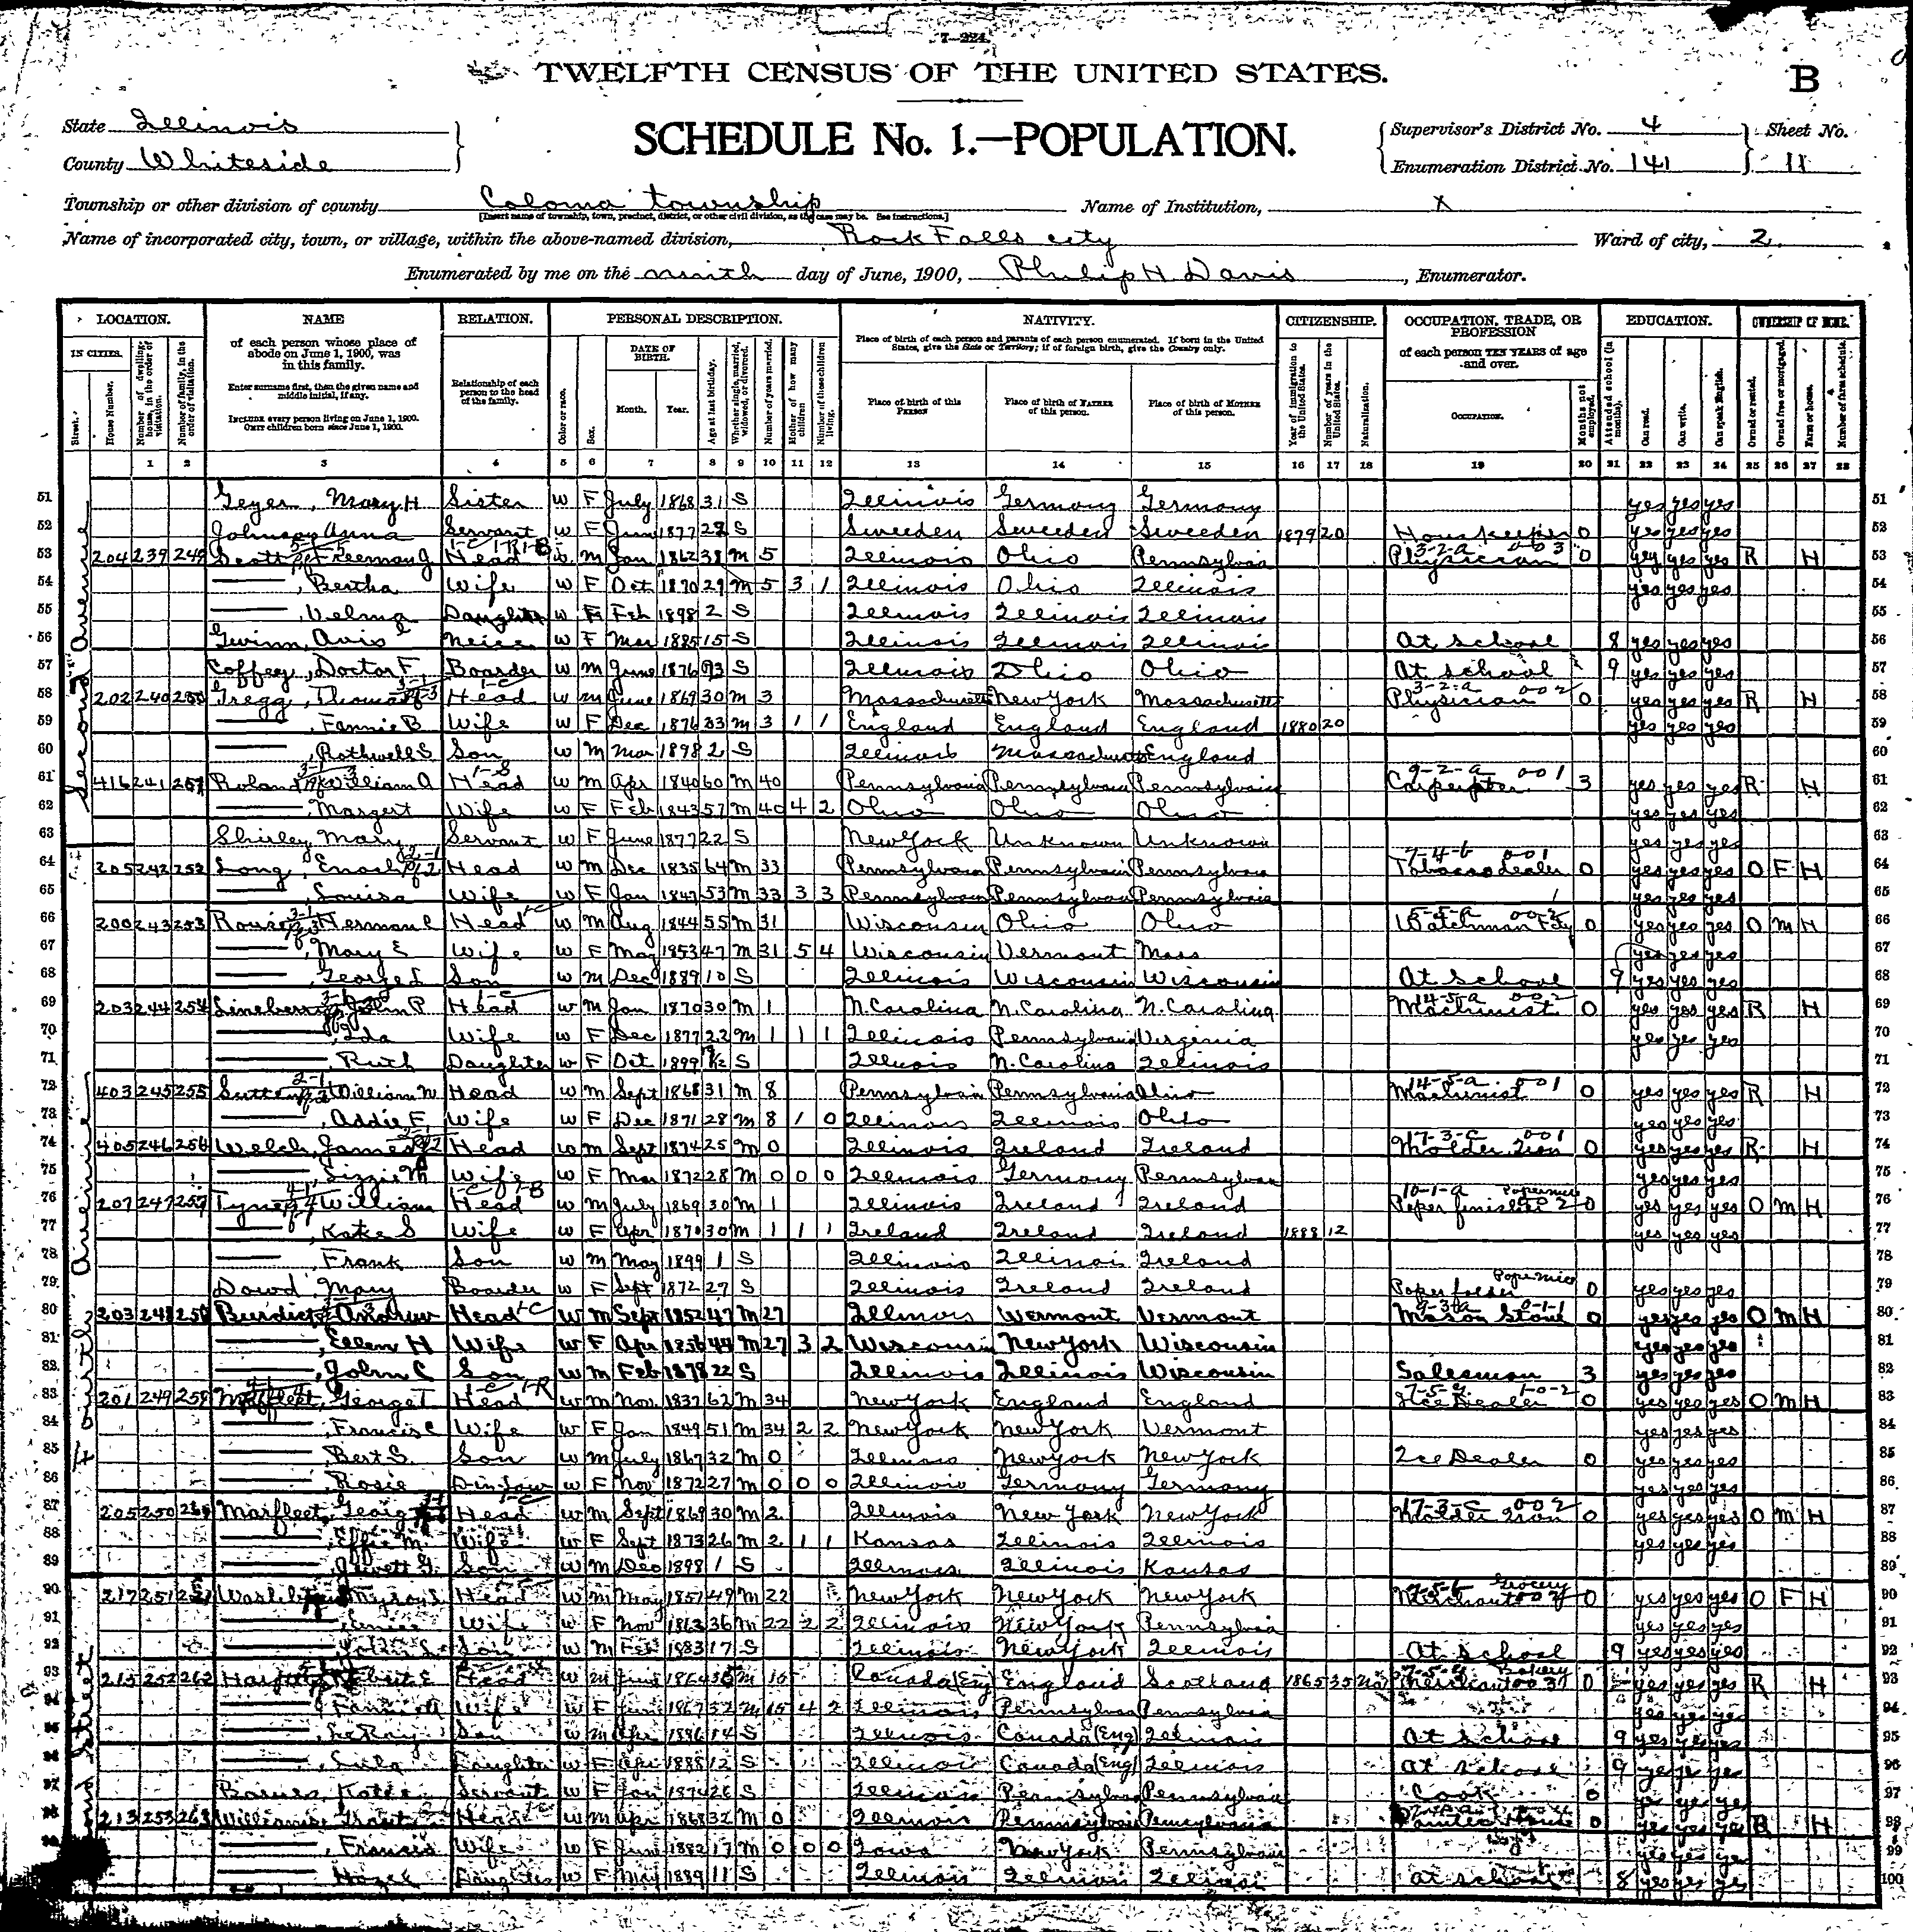 Francis ford died census #5